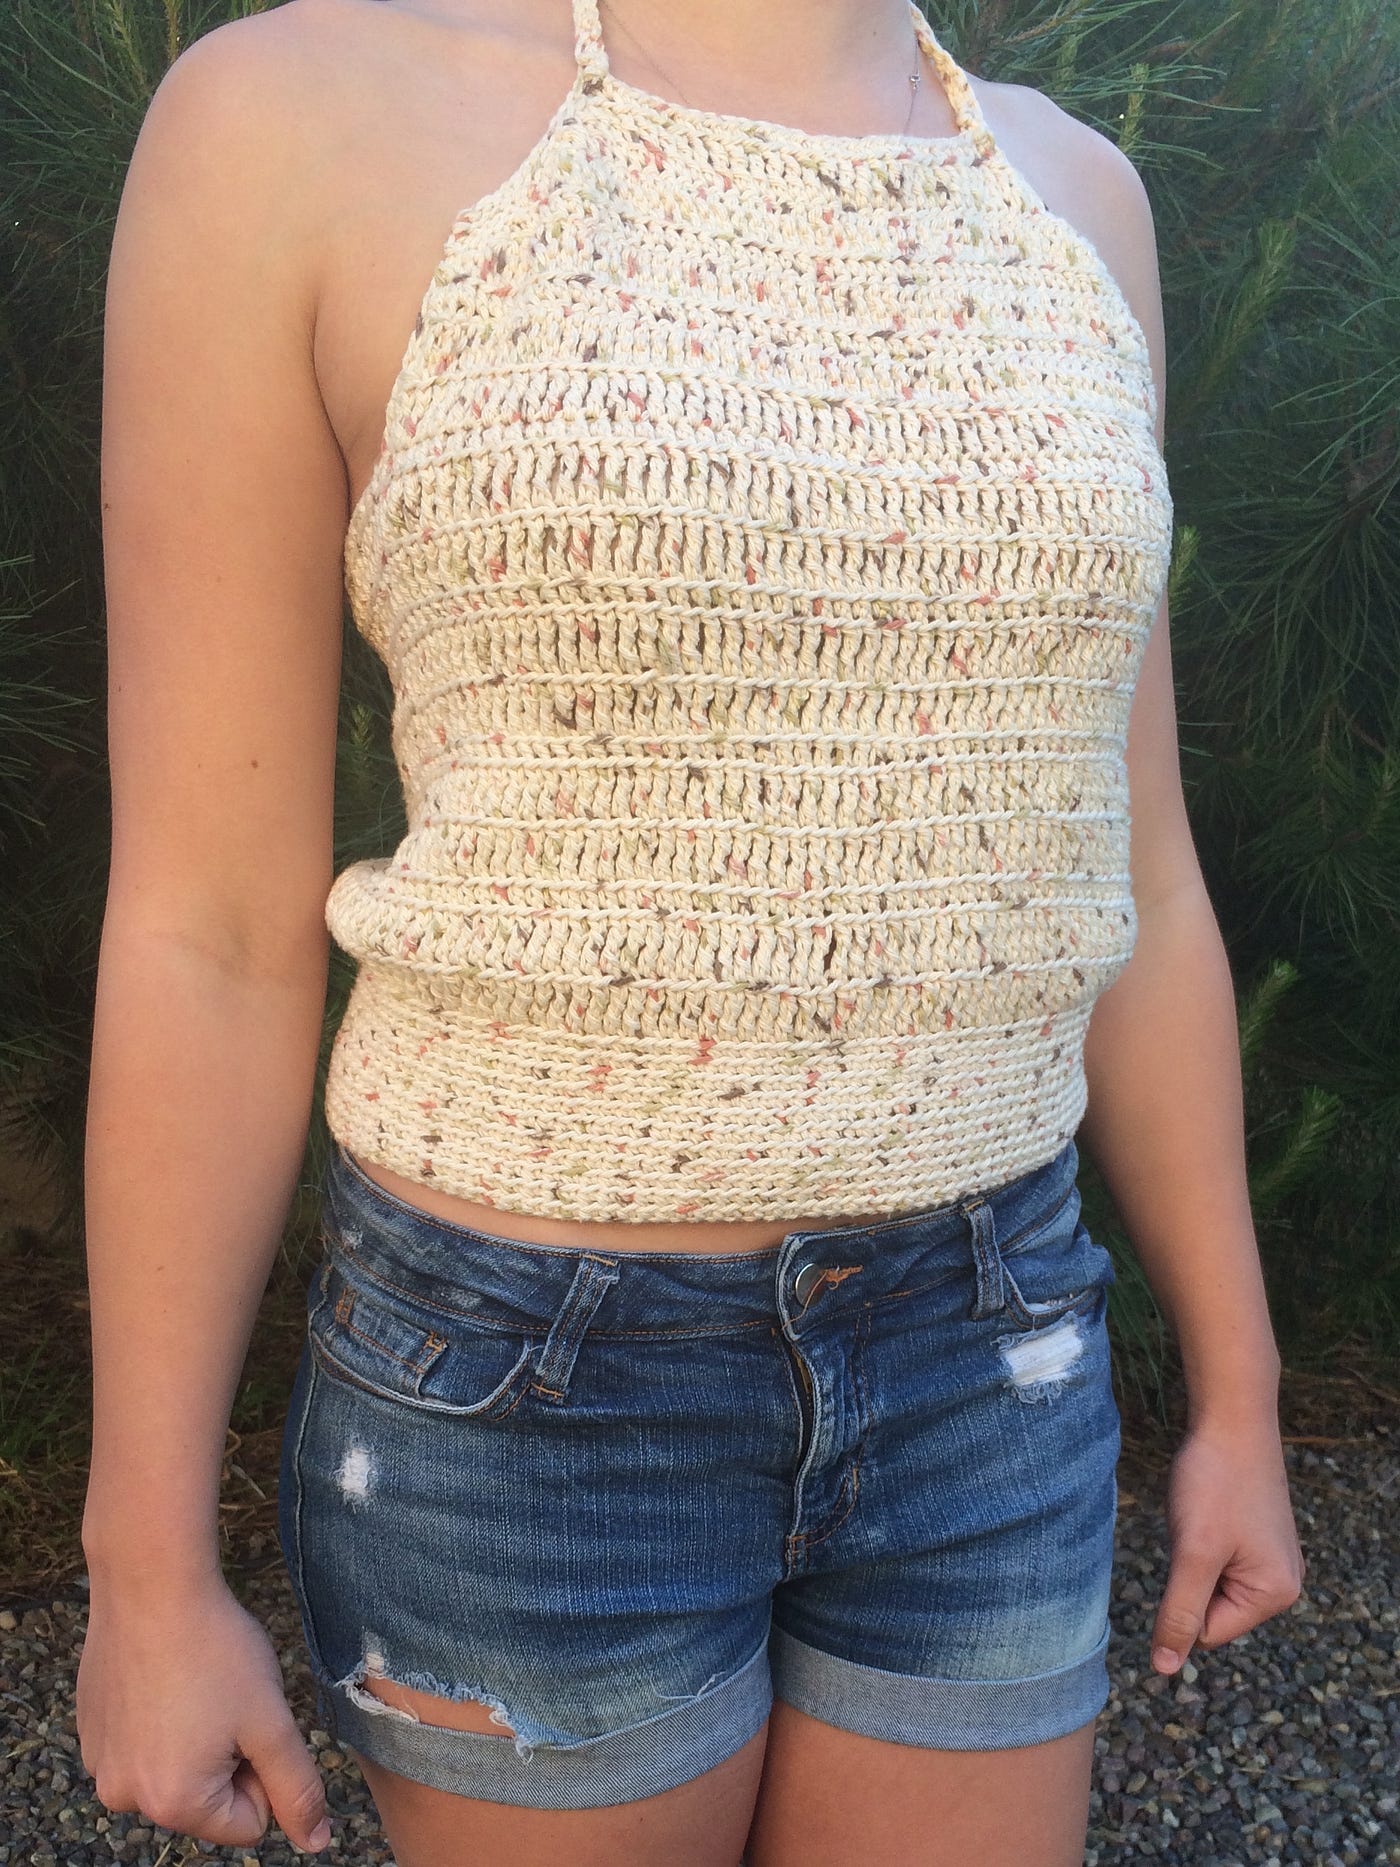 Simple Crochet Halter Top. Free Pattern and Video Tutorial, by Quinn Nunes